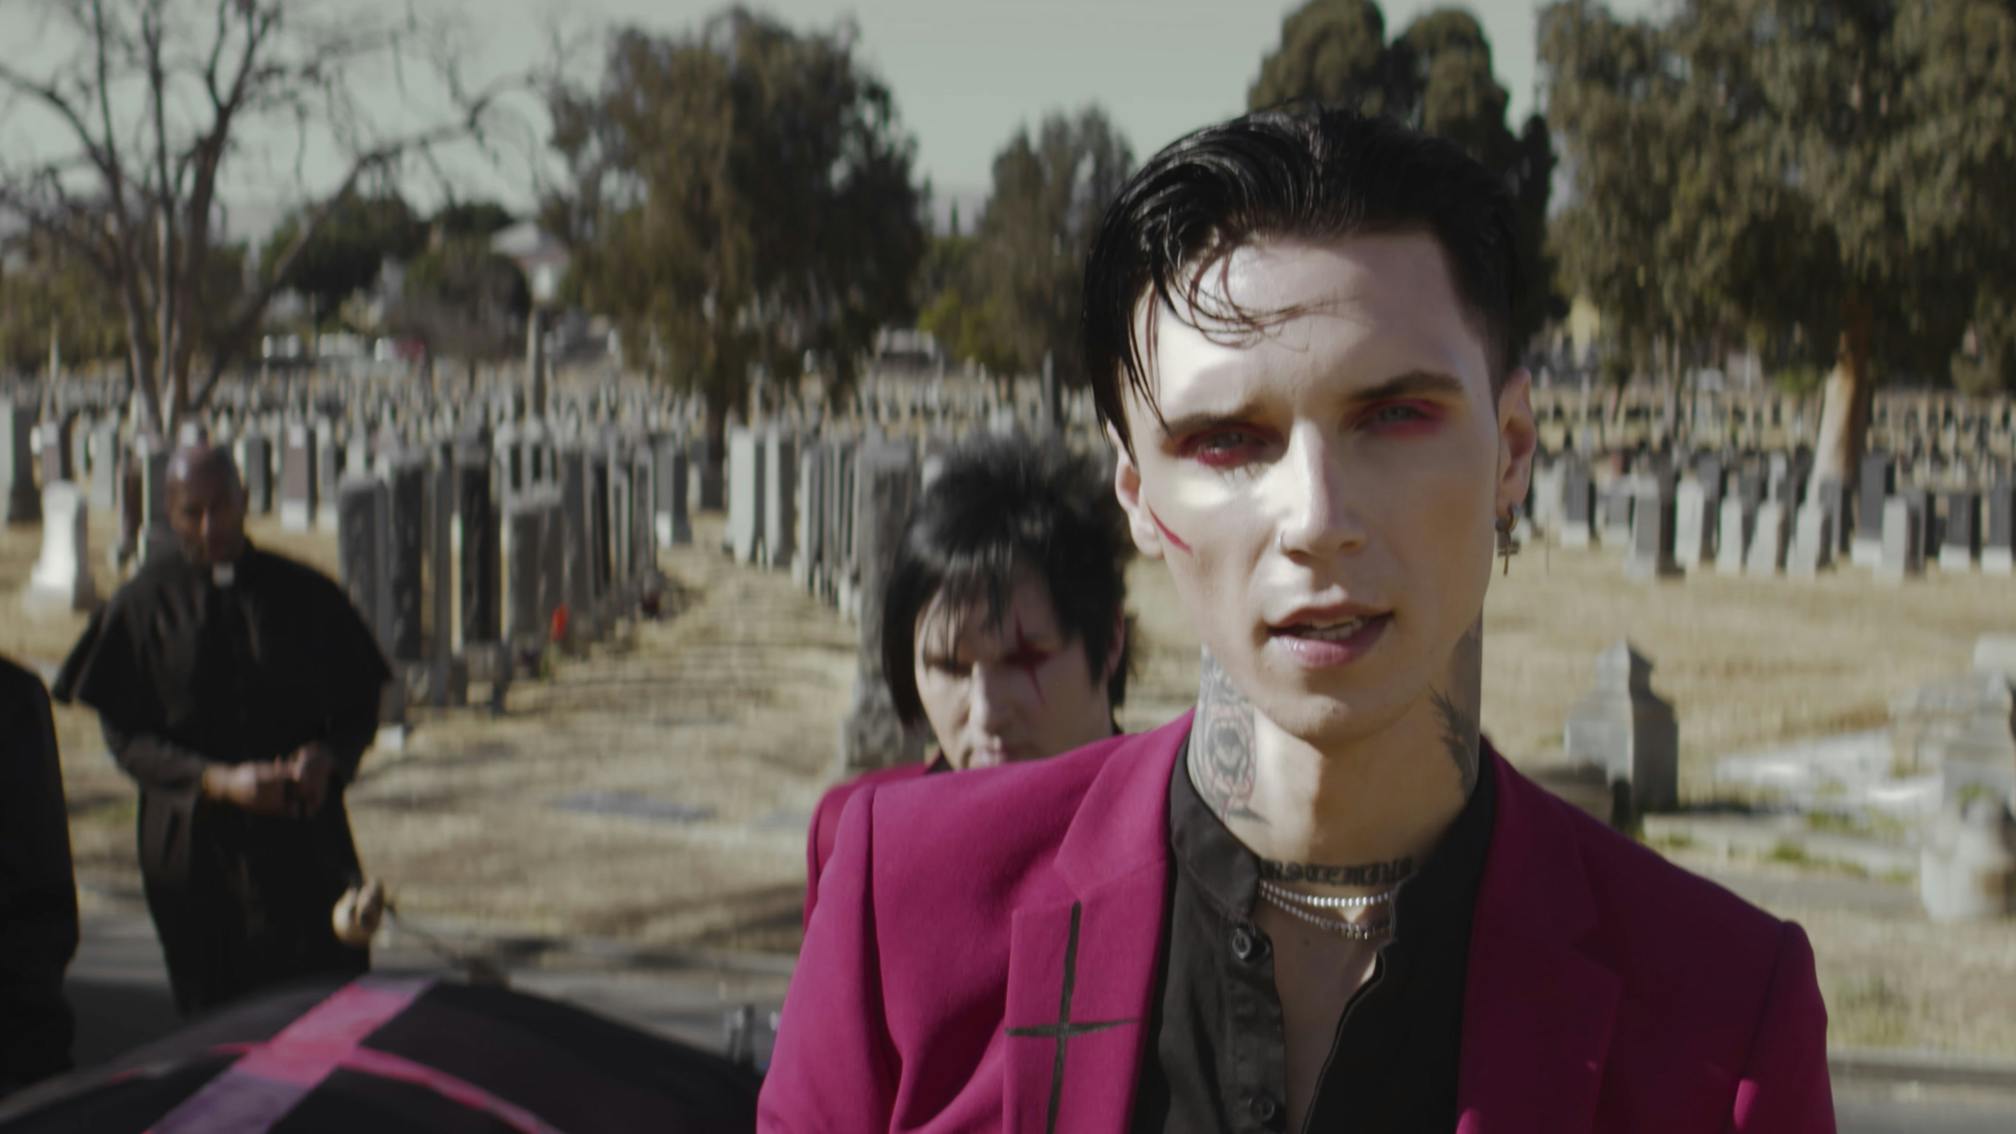 Black Veil Brides complete "four-video story arc" with new single Torch